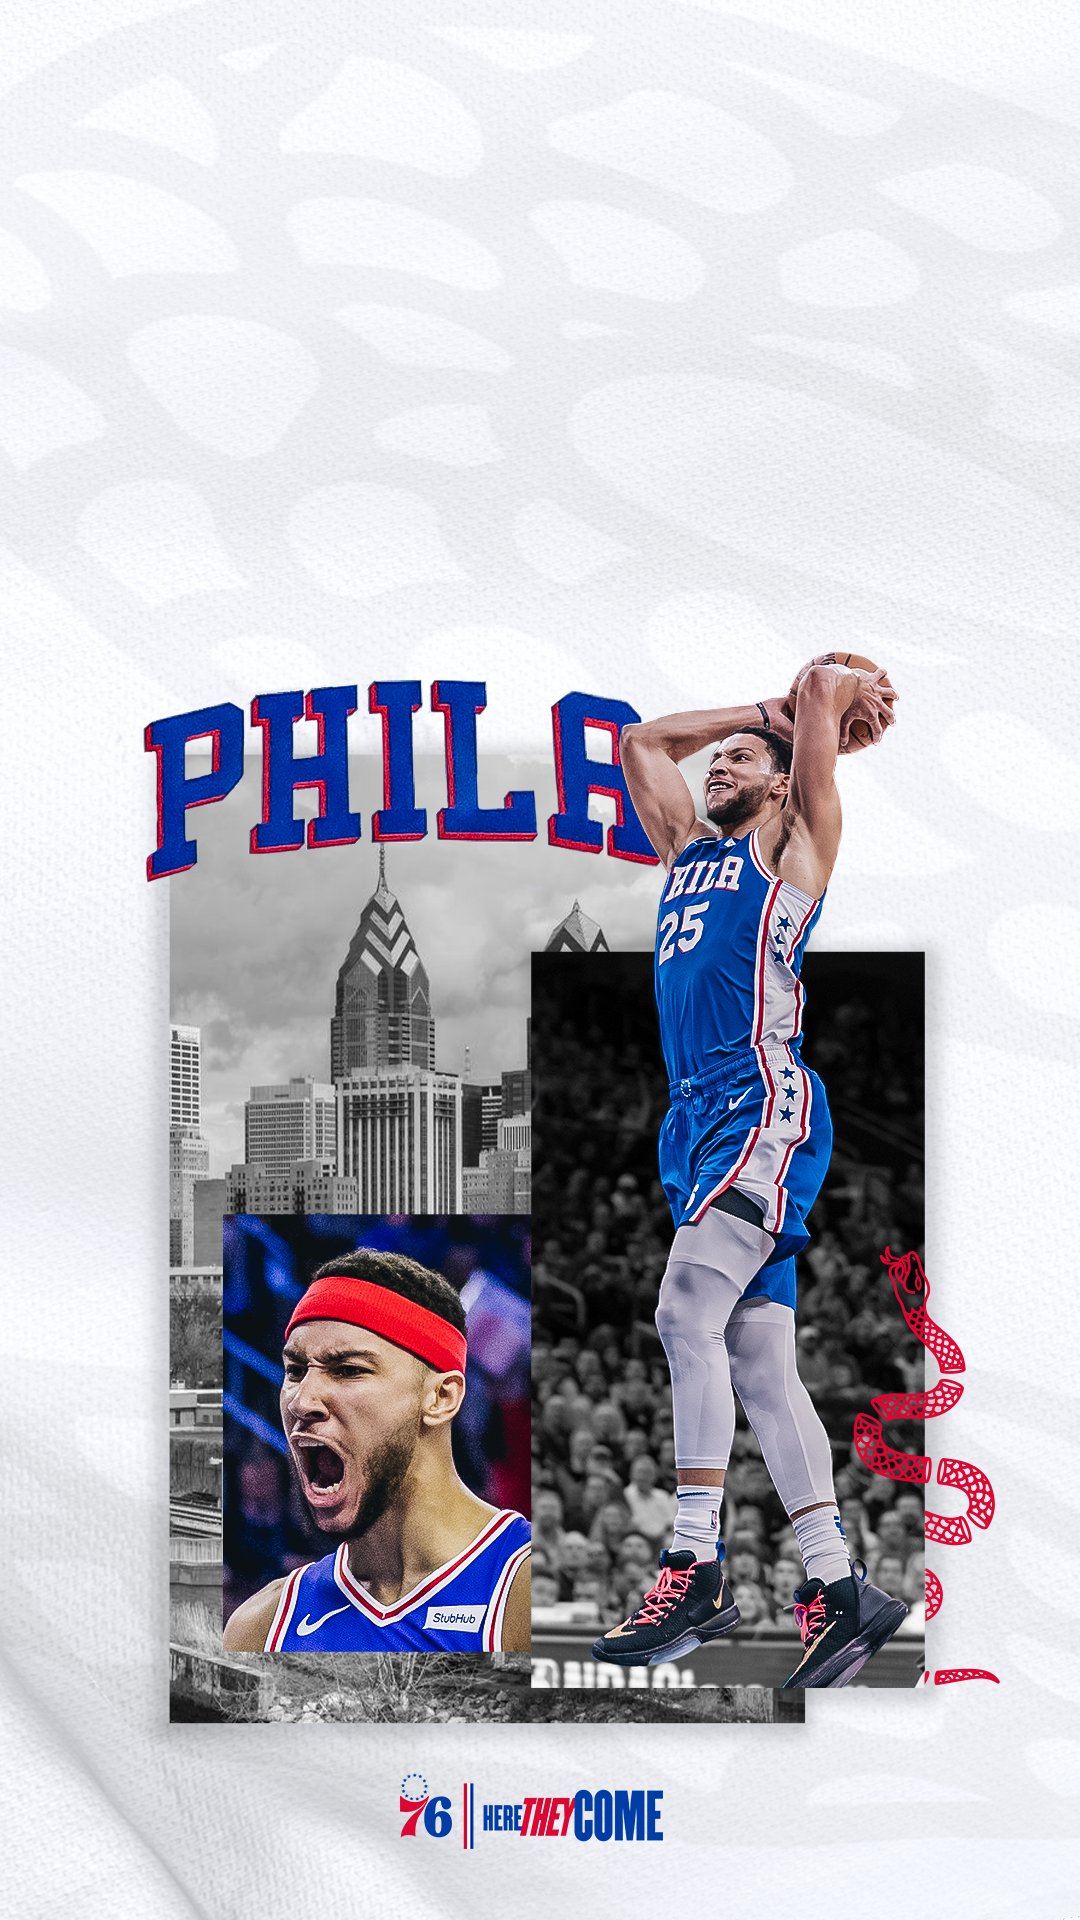 Sixers 2020 Wallpapers